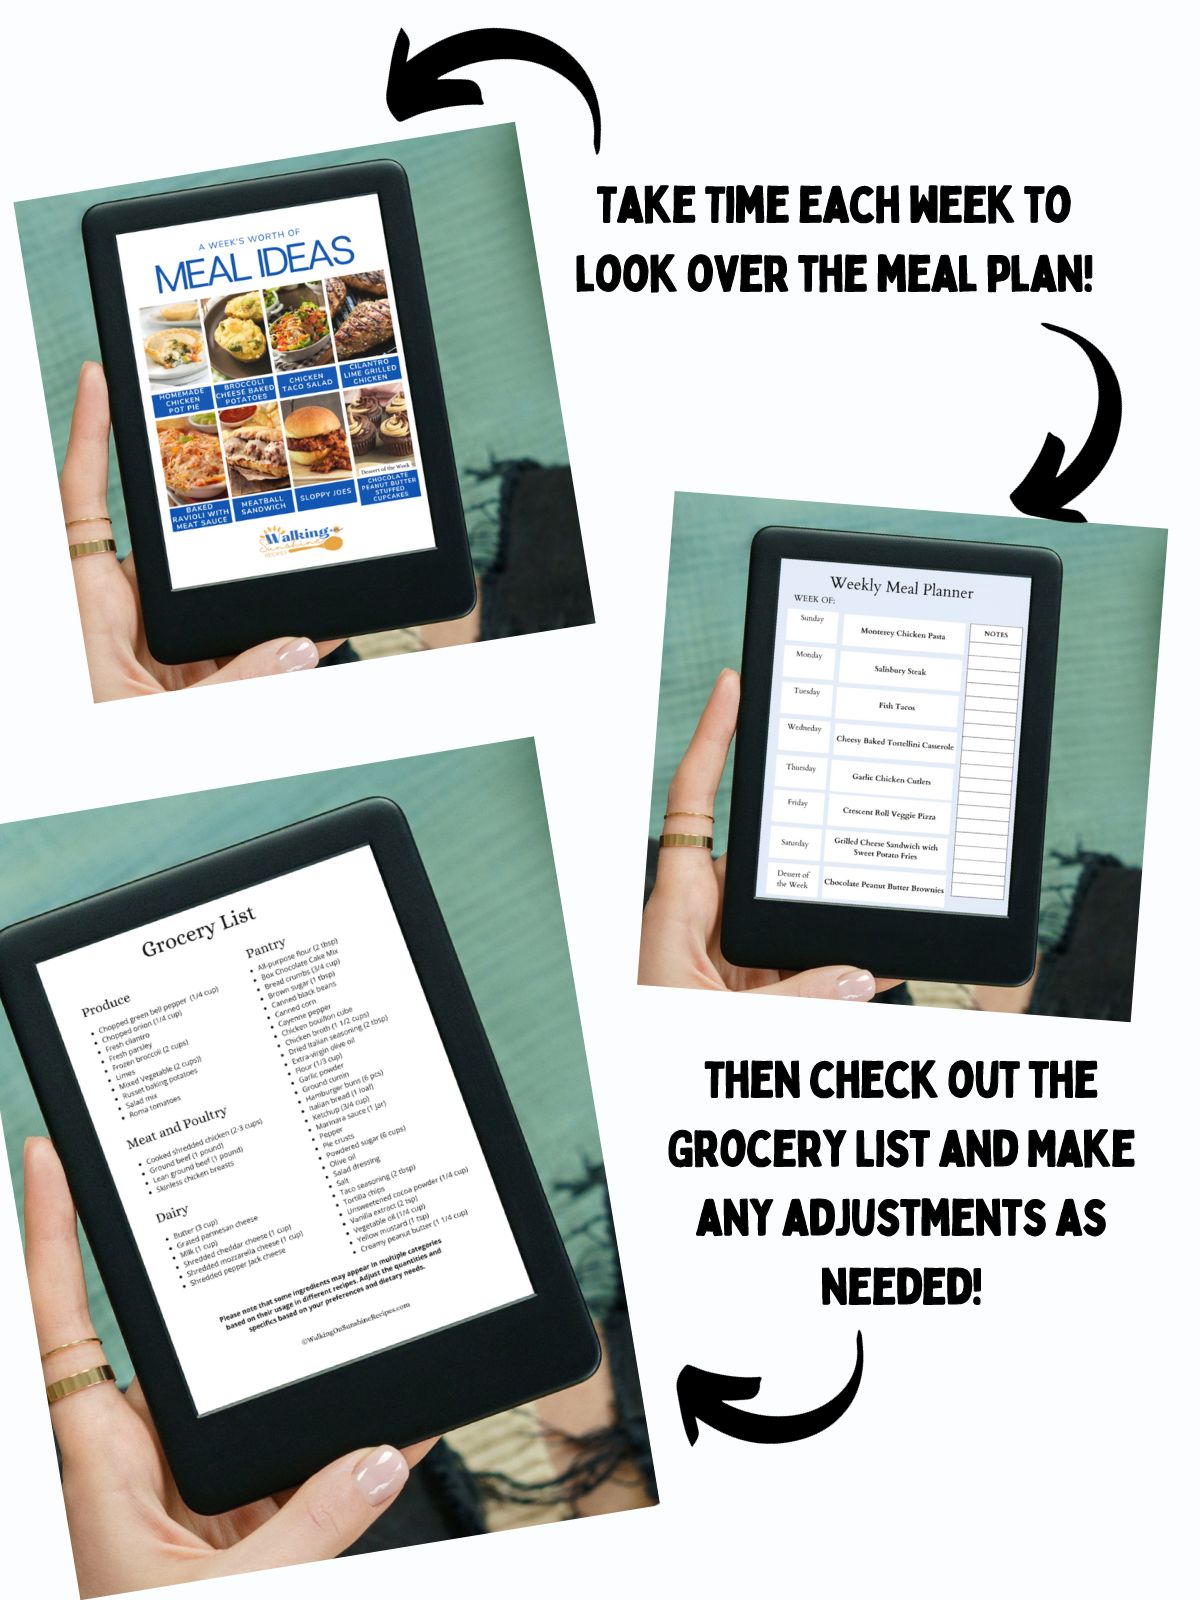 Meal Plan Subscription tablet promo photos.